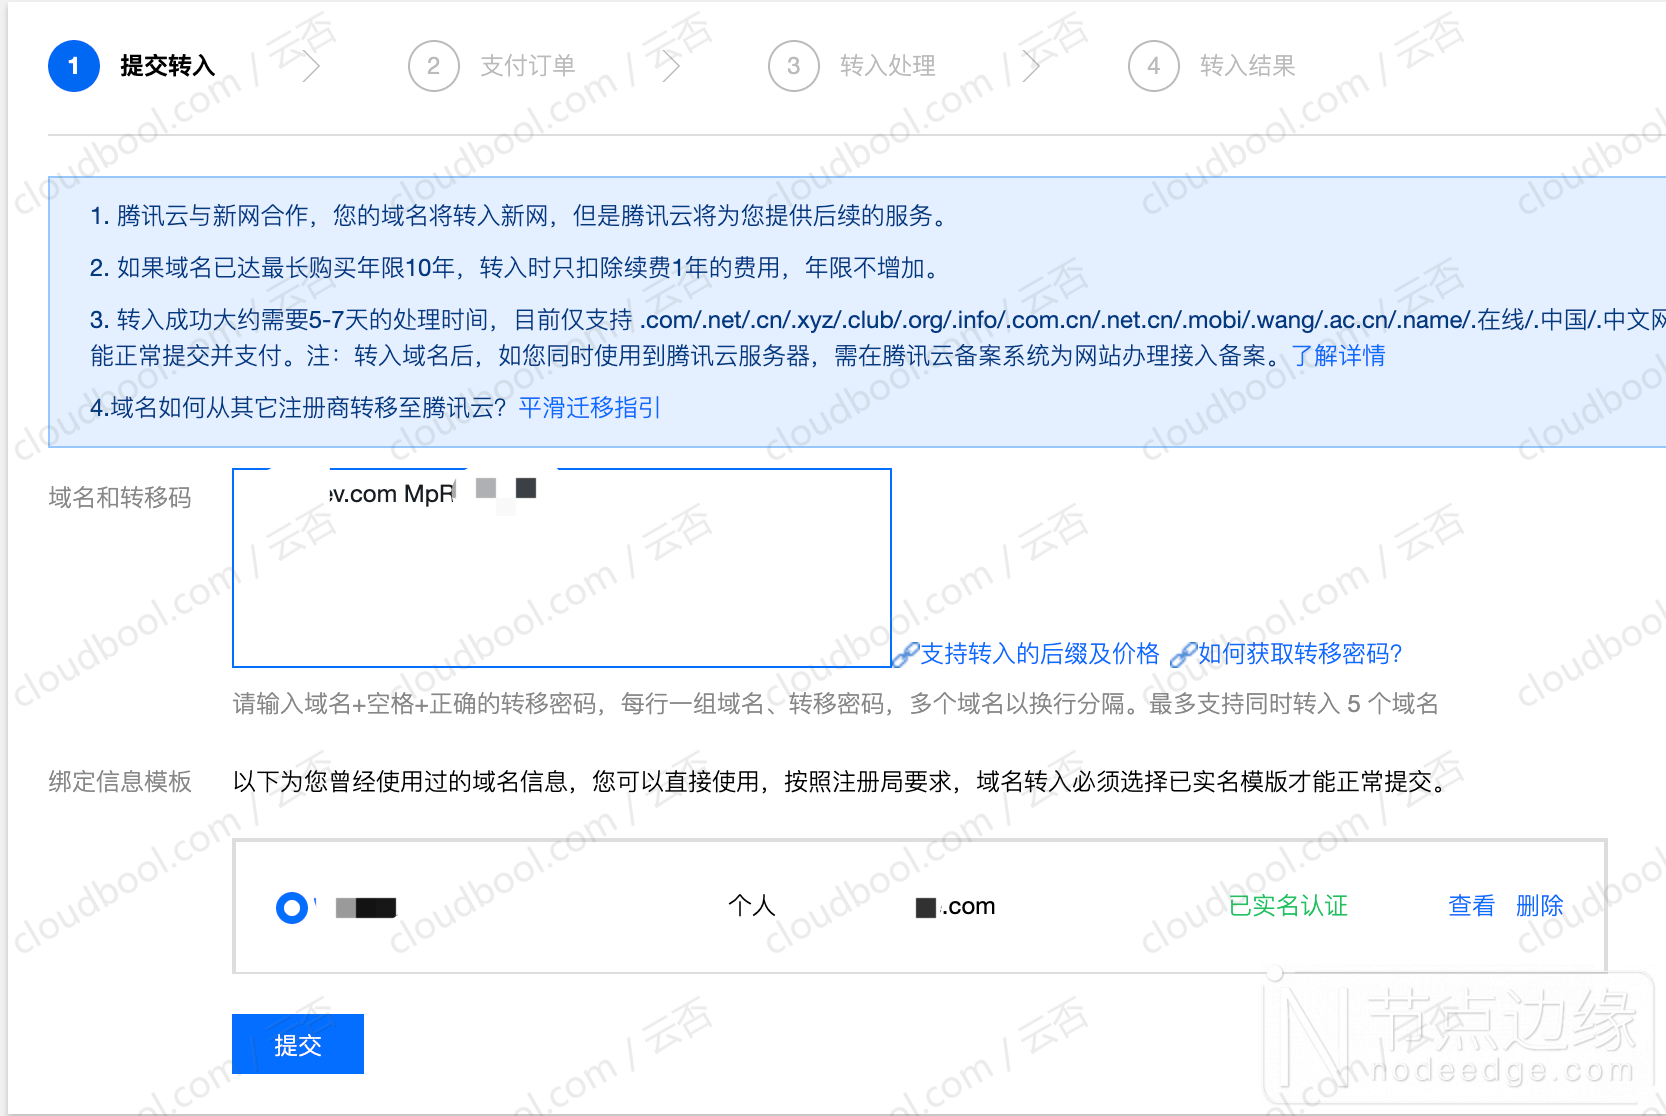 tencent-cloud-domian-transfer-in.png